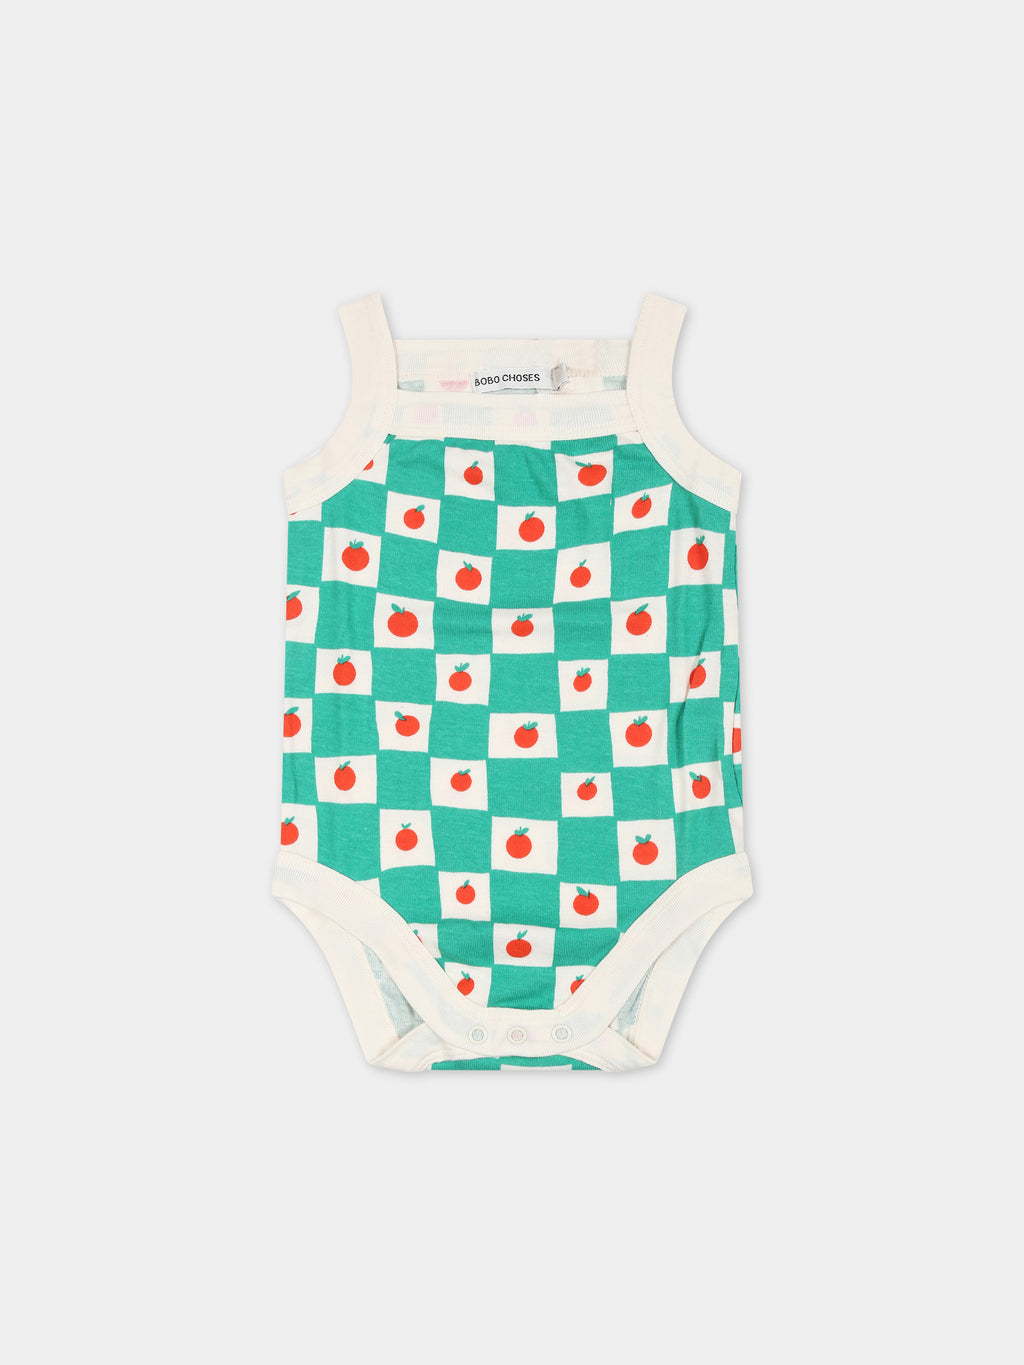 Green bodysuit for babykids with tomatoes